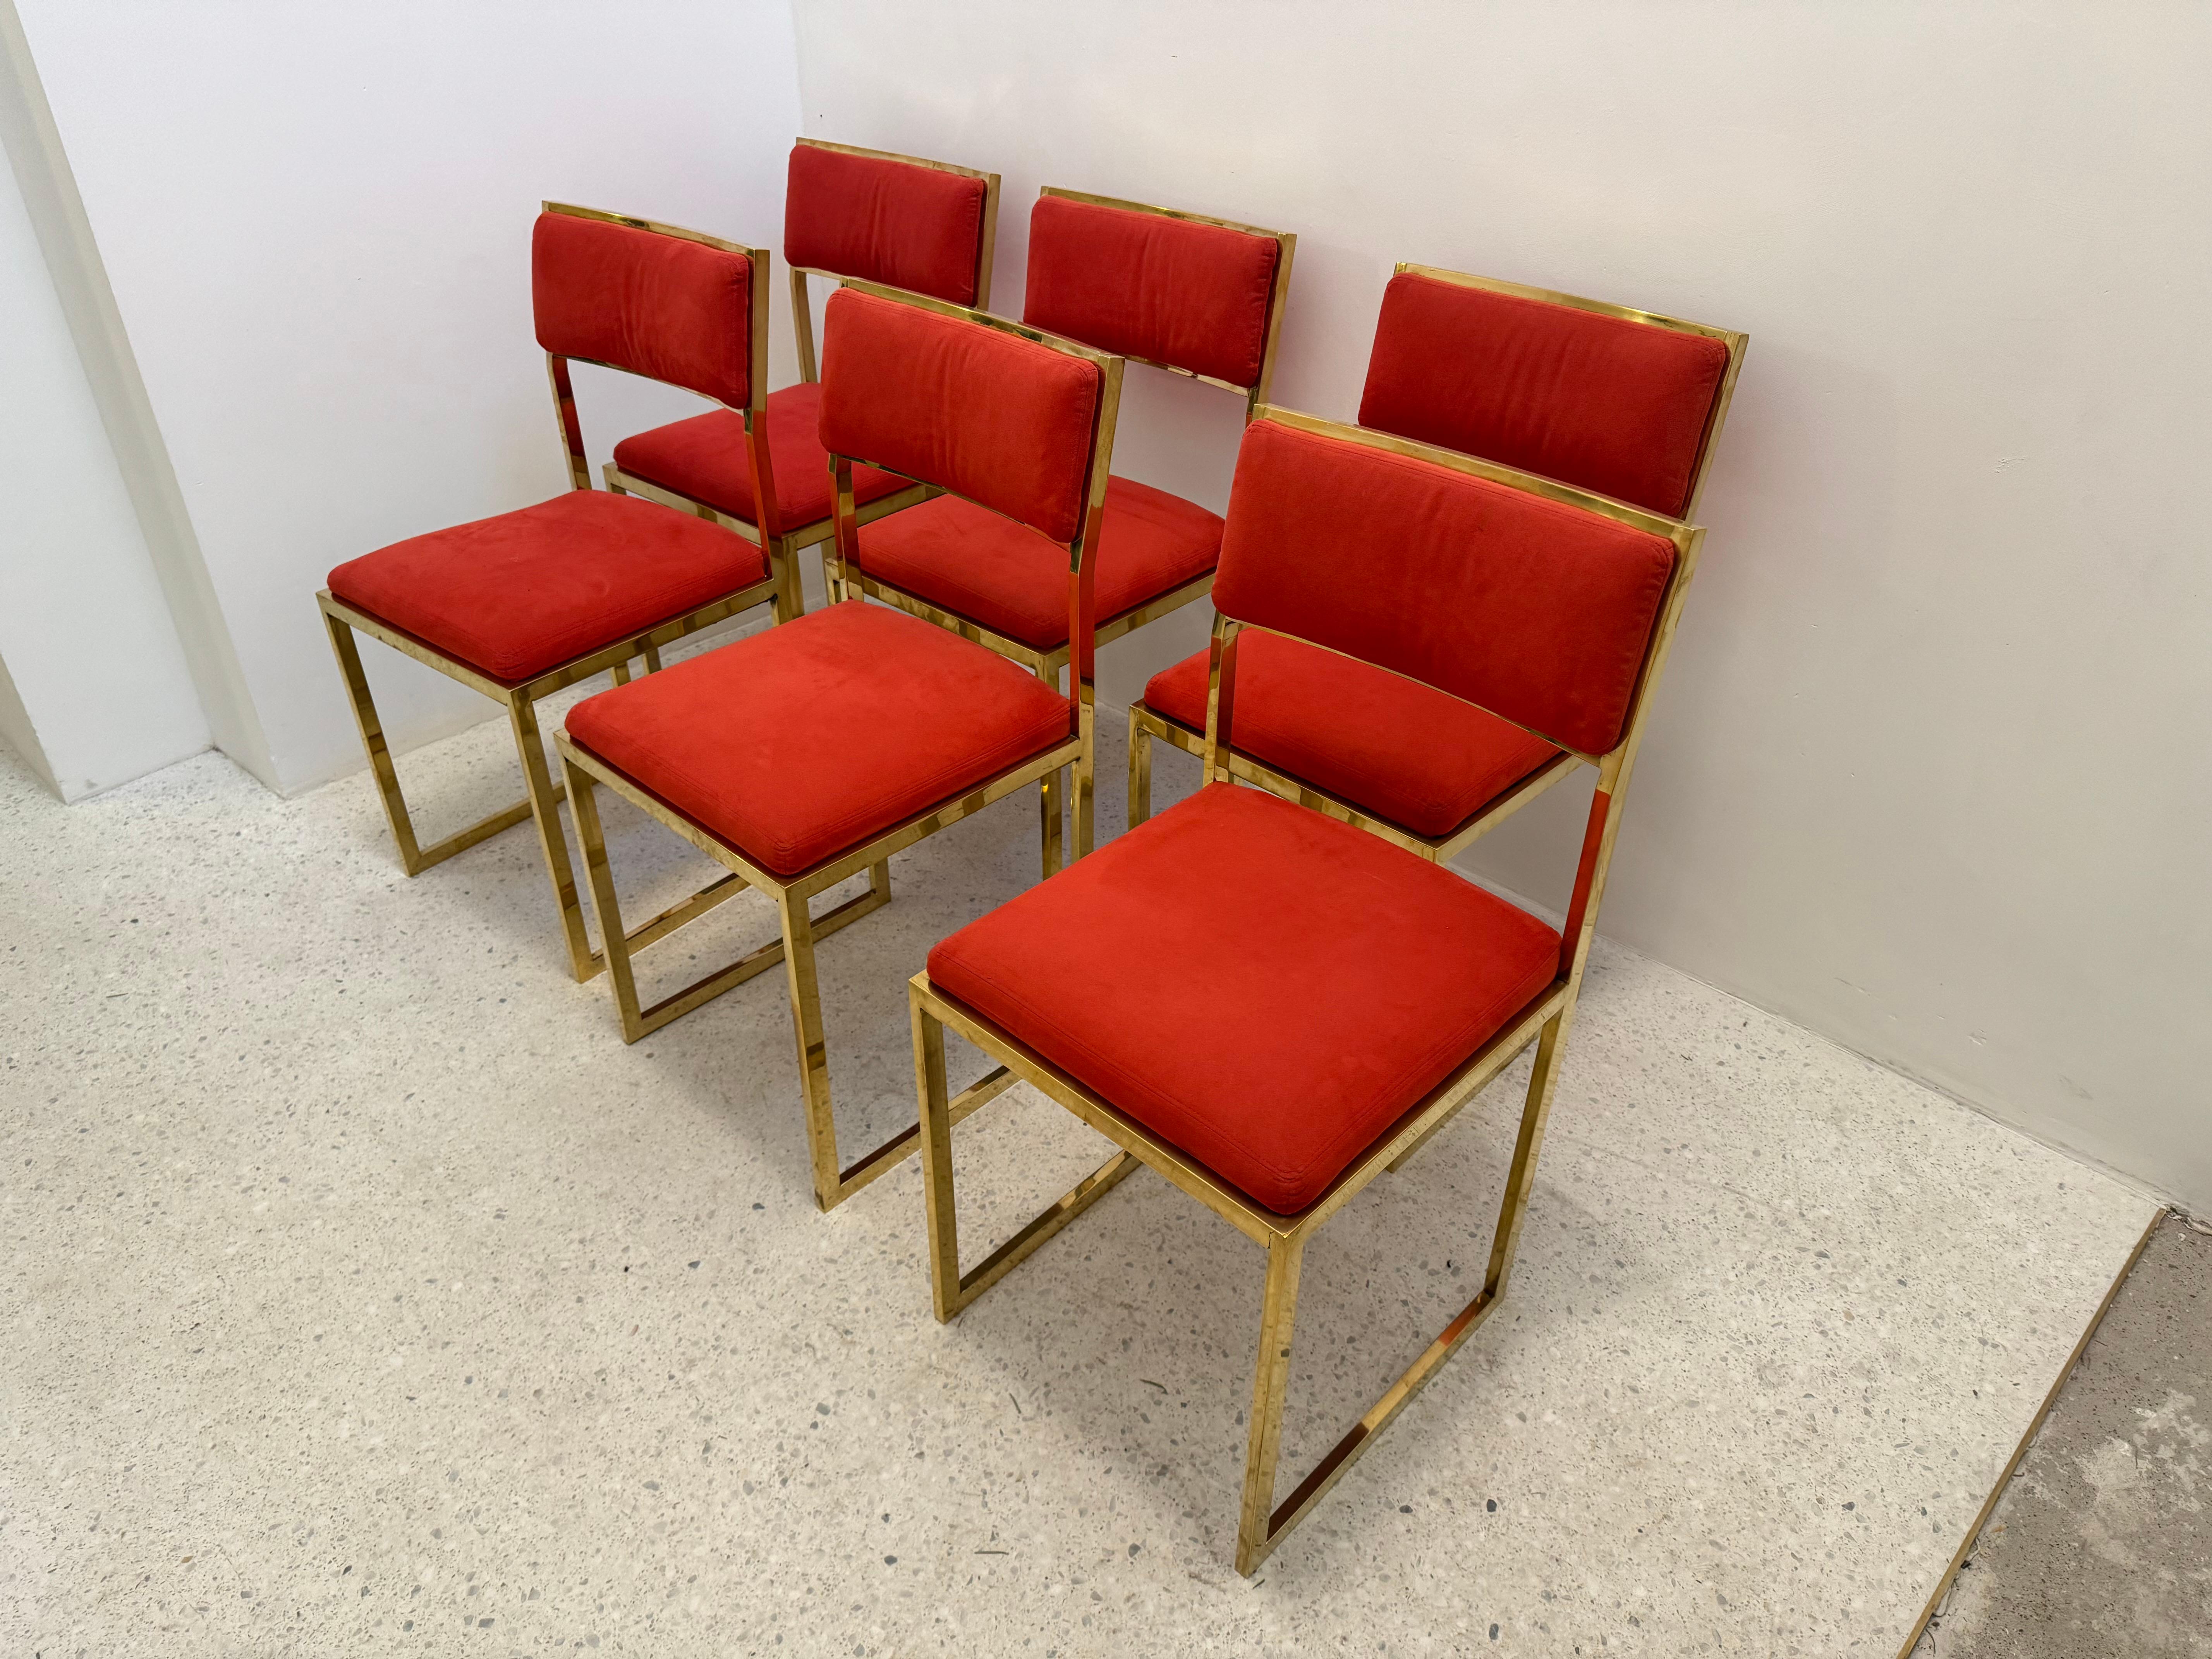 Set of six chairs with red fabric and golden gilded metal.